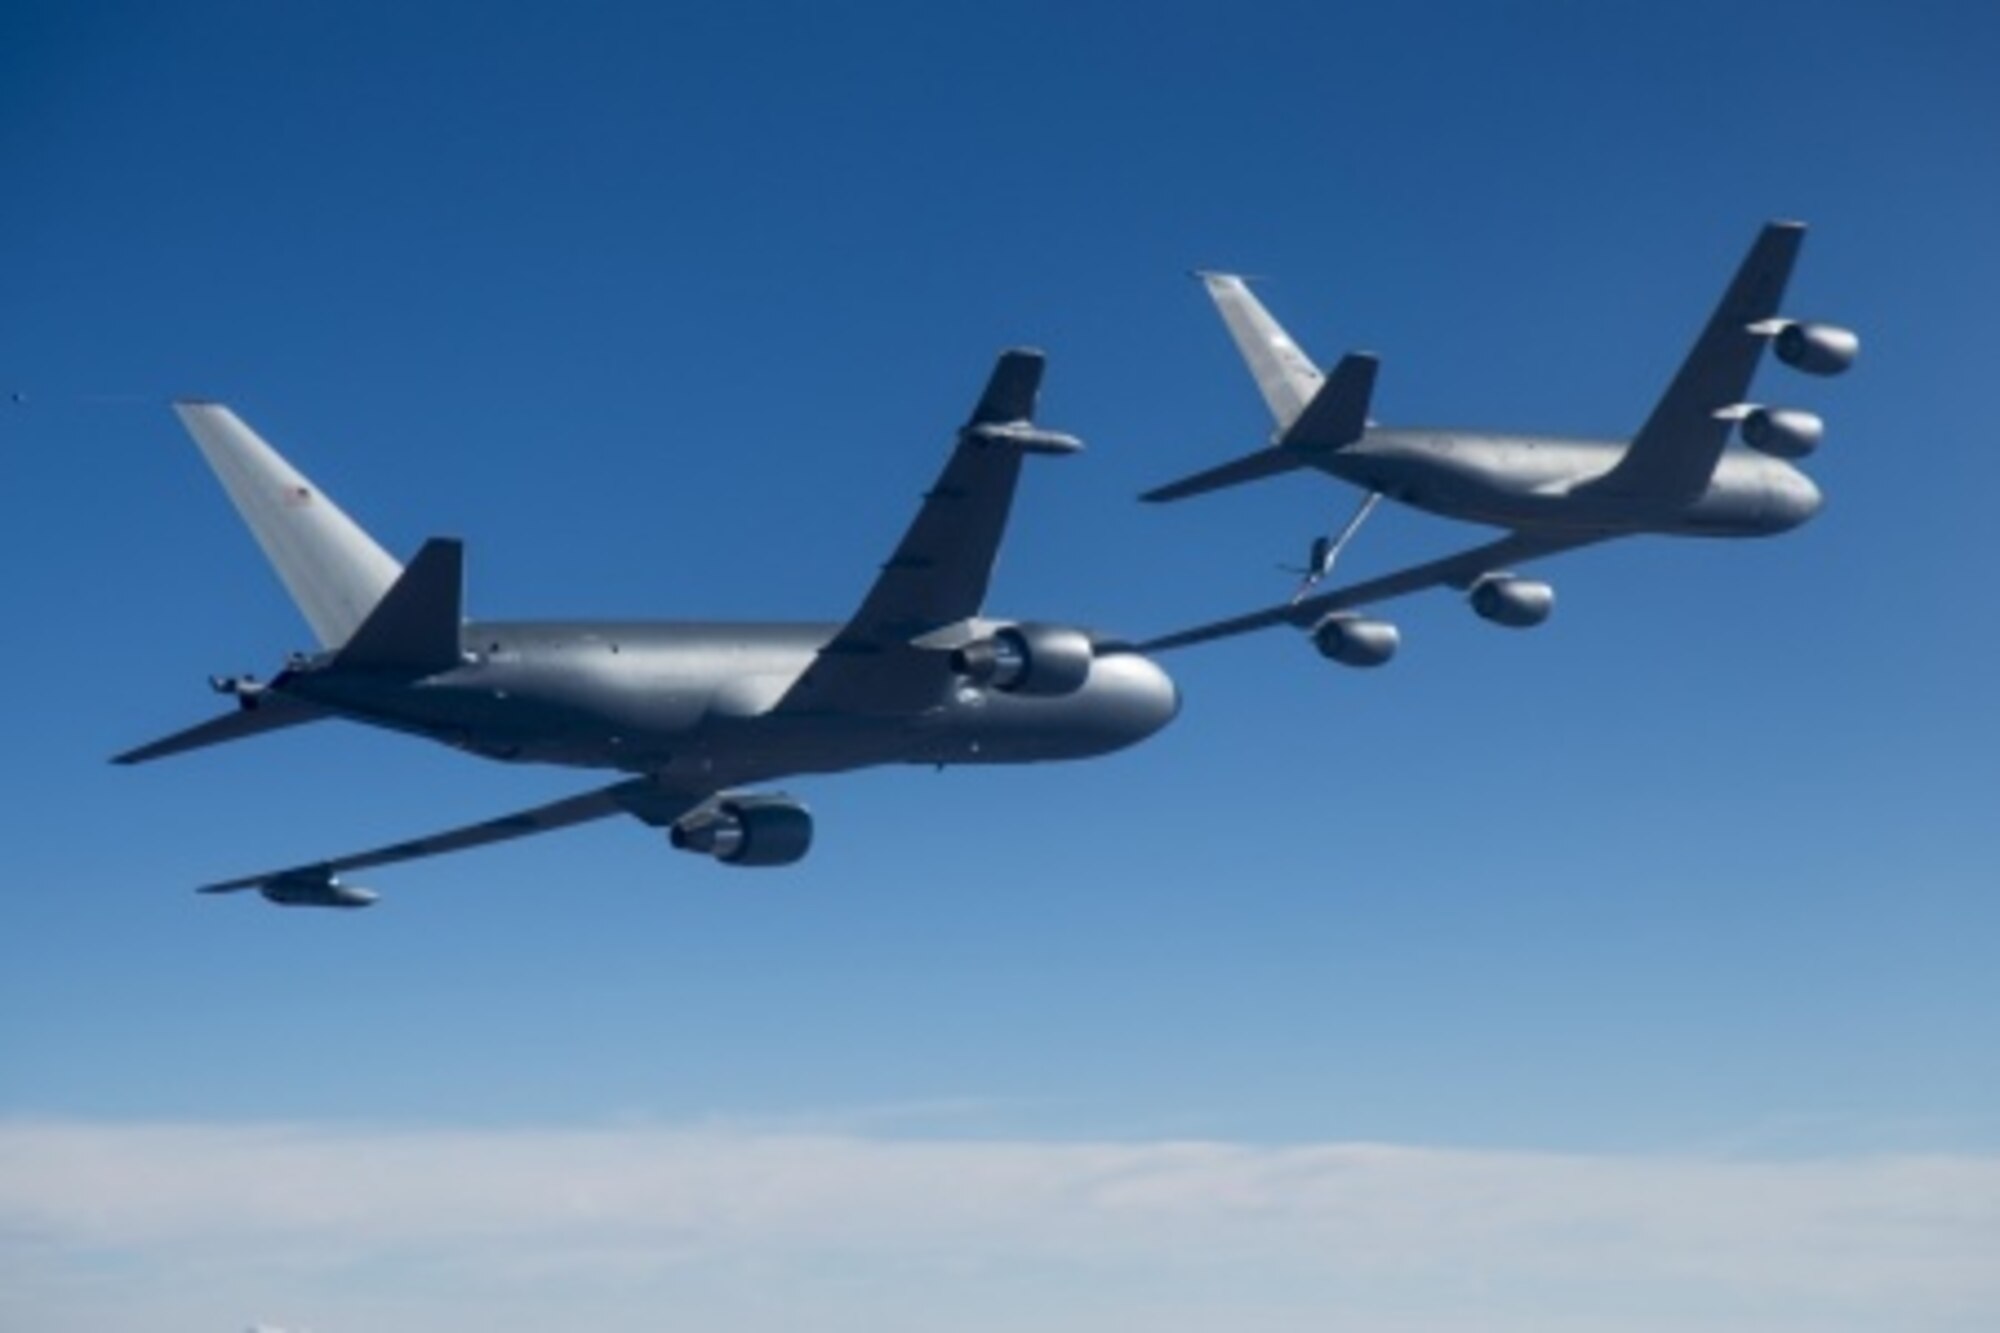 The KC-46A program's first test aircraft, EMD-1, conducts tests of aircraft acceleration and vibration exposure while flying in receiver formation at various speeds and altitudes behind the KC-135 Stratotanker. (U.S. Navy photo/Petty Officer 1st Class Christopher Okula)